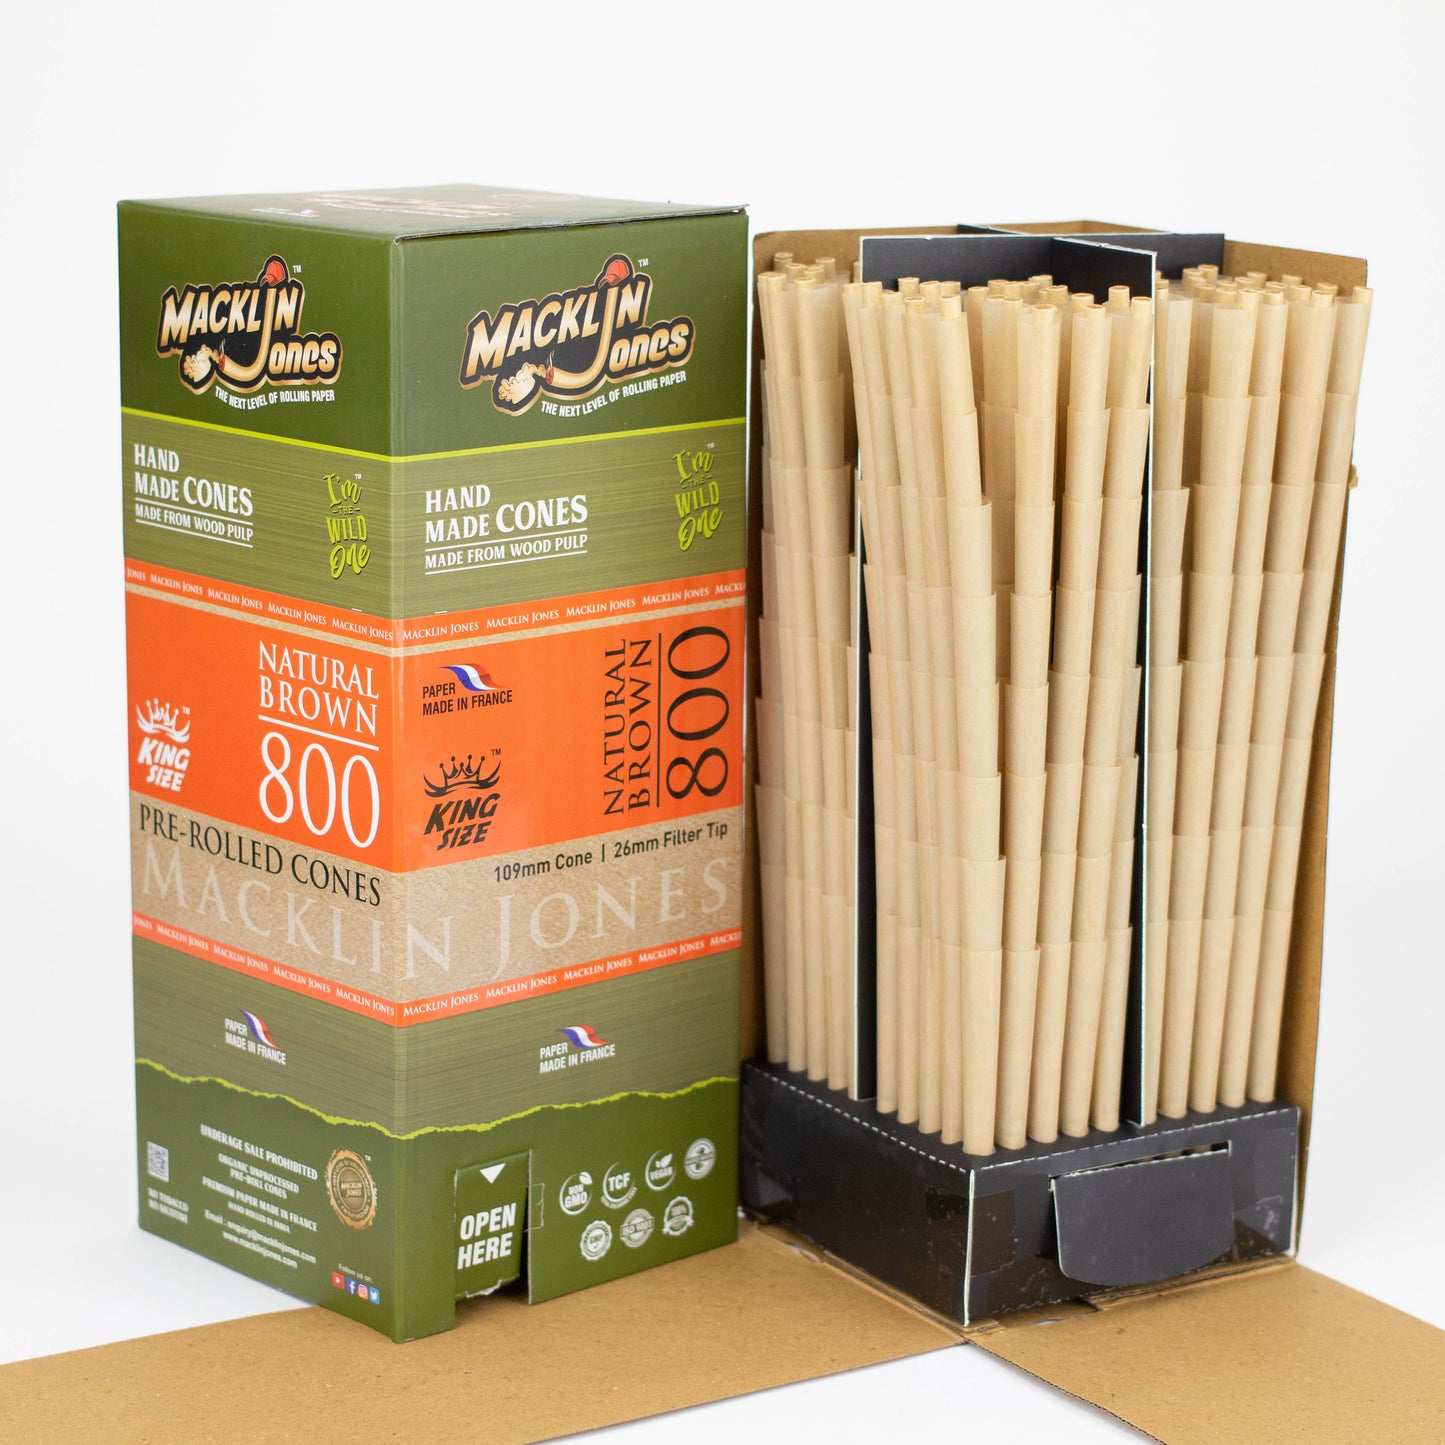 Macklin Jones - Natural Brown King Size Pre-Rolled cones Tower 800_1